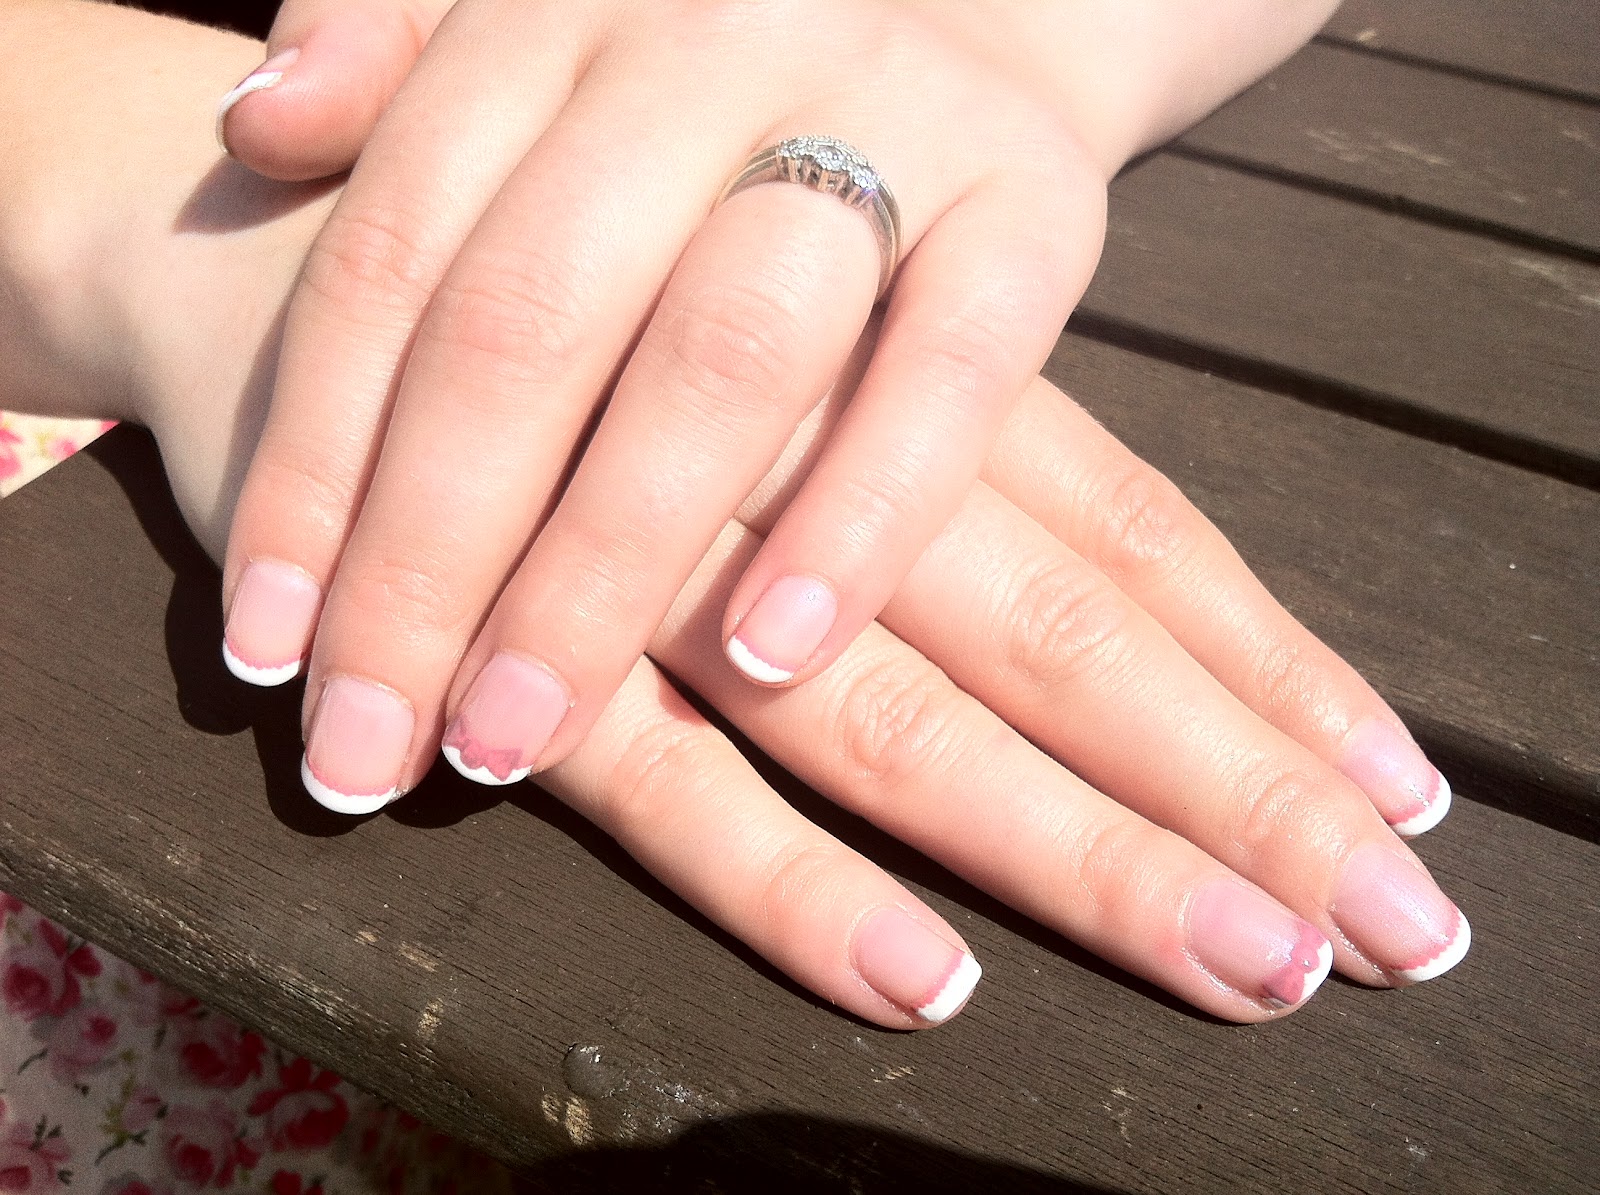 6. CND Shellac Nail Art Tutorial: French Manicure - wide 8